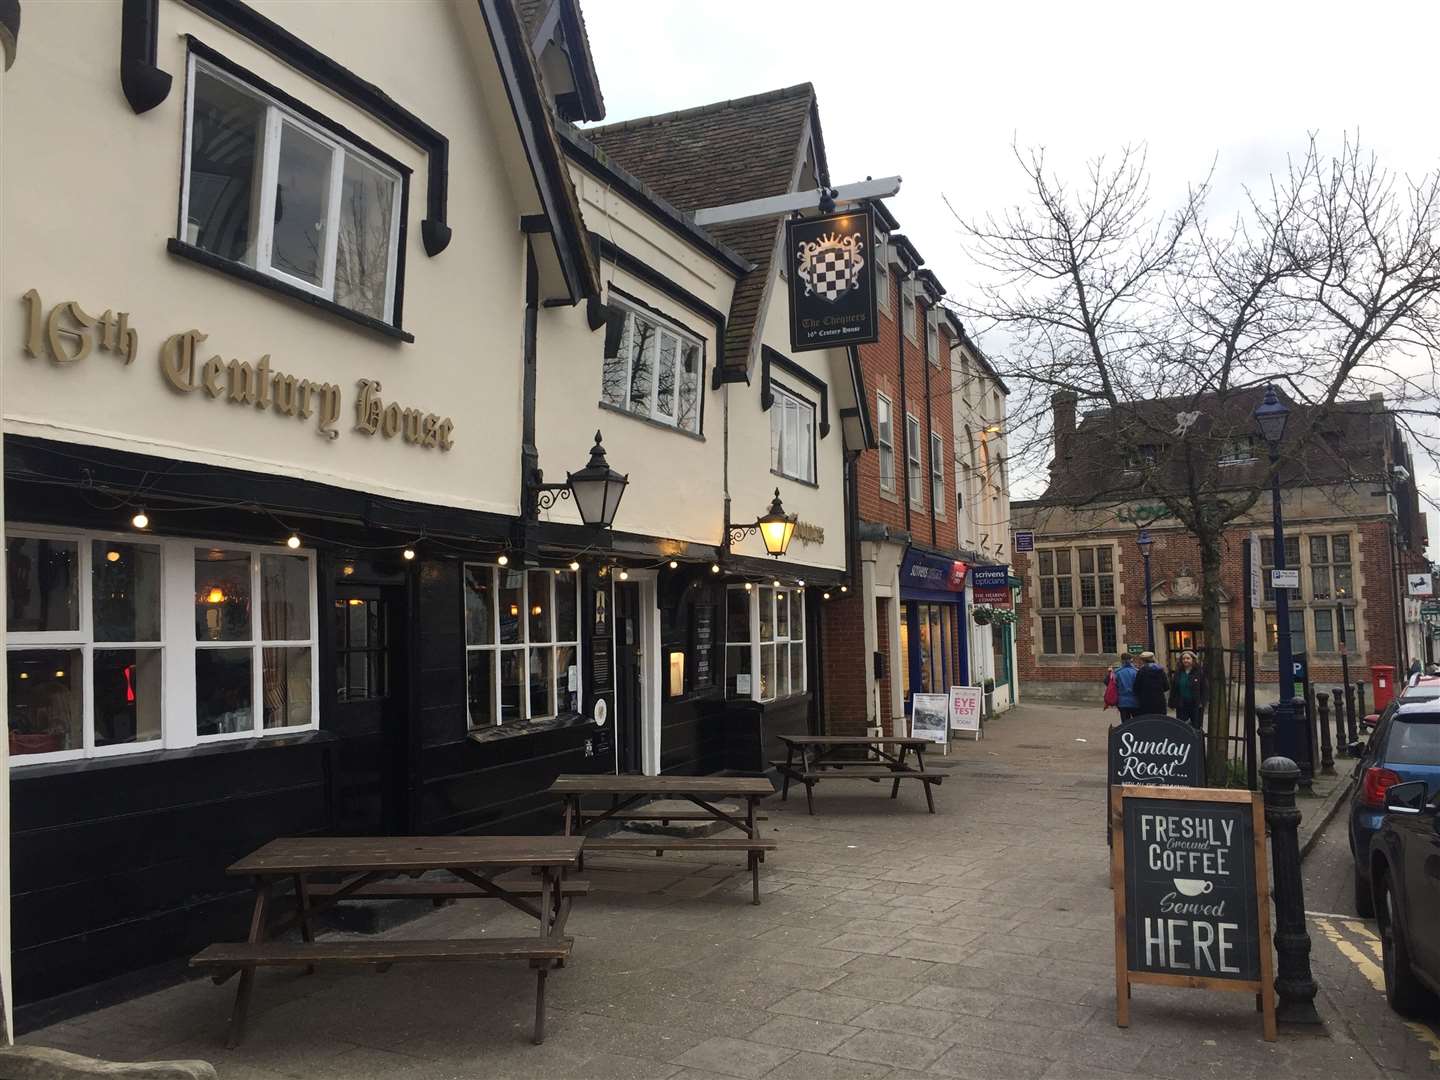 The Chequers in the High Street